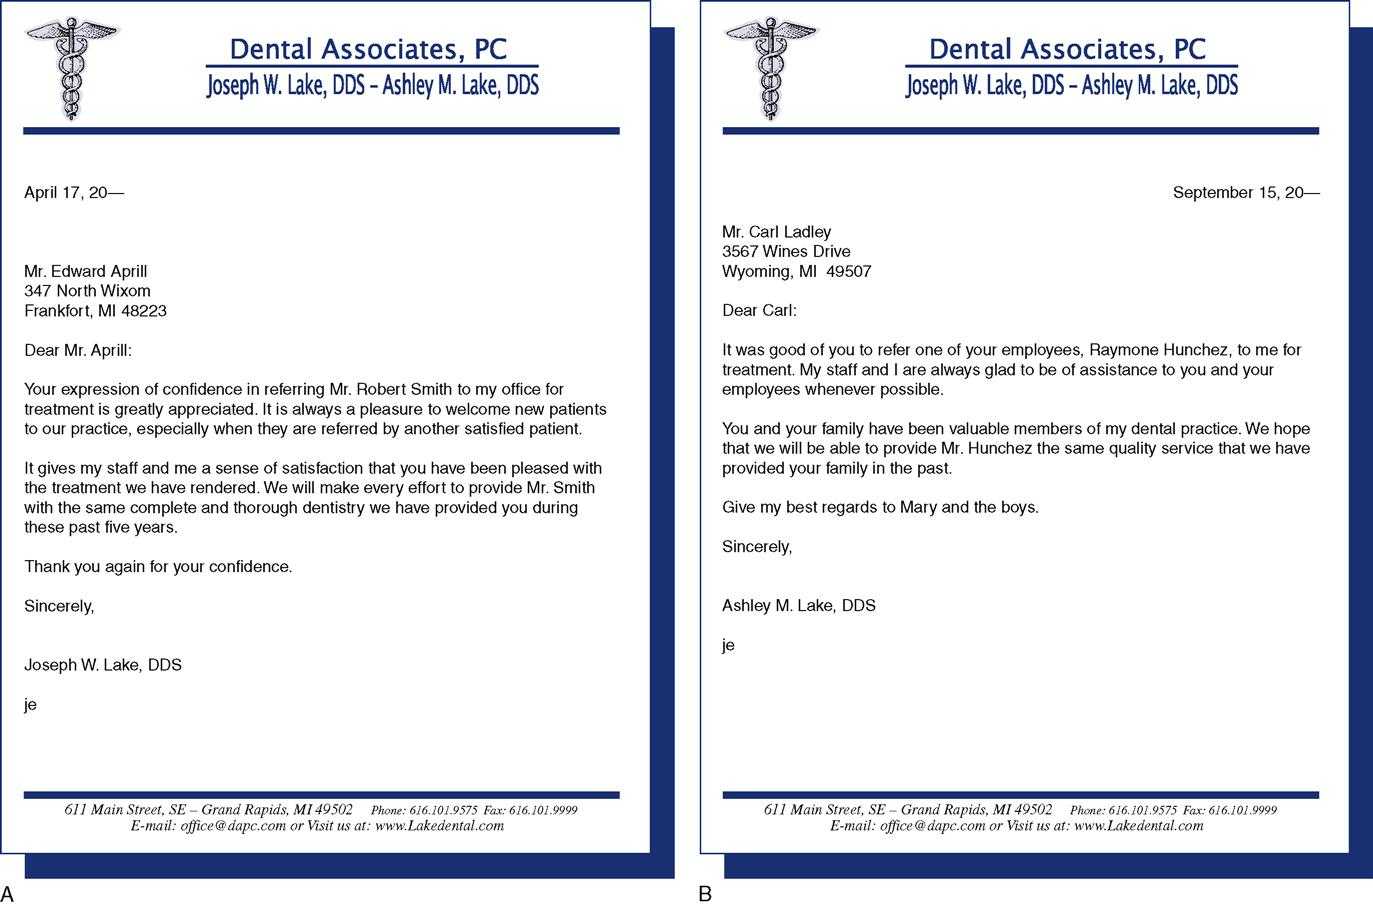 9-written-communications-pocket-dentistry-with-dentist-note-template-best-professional